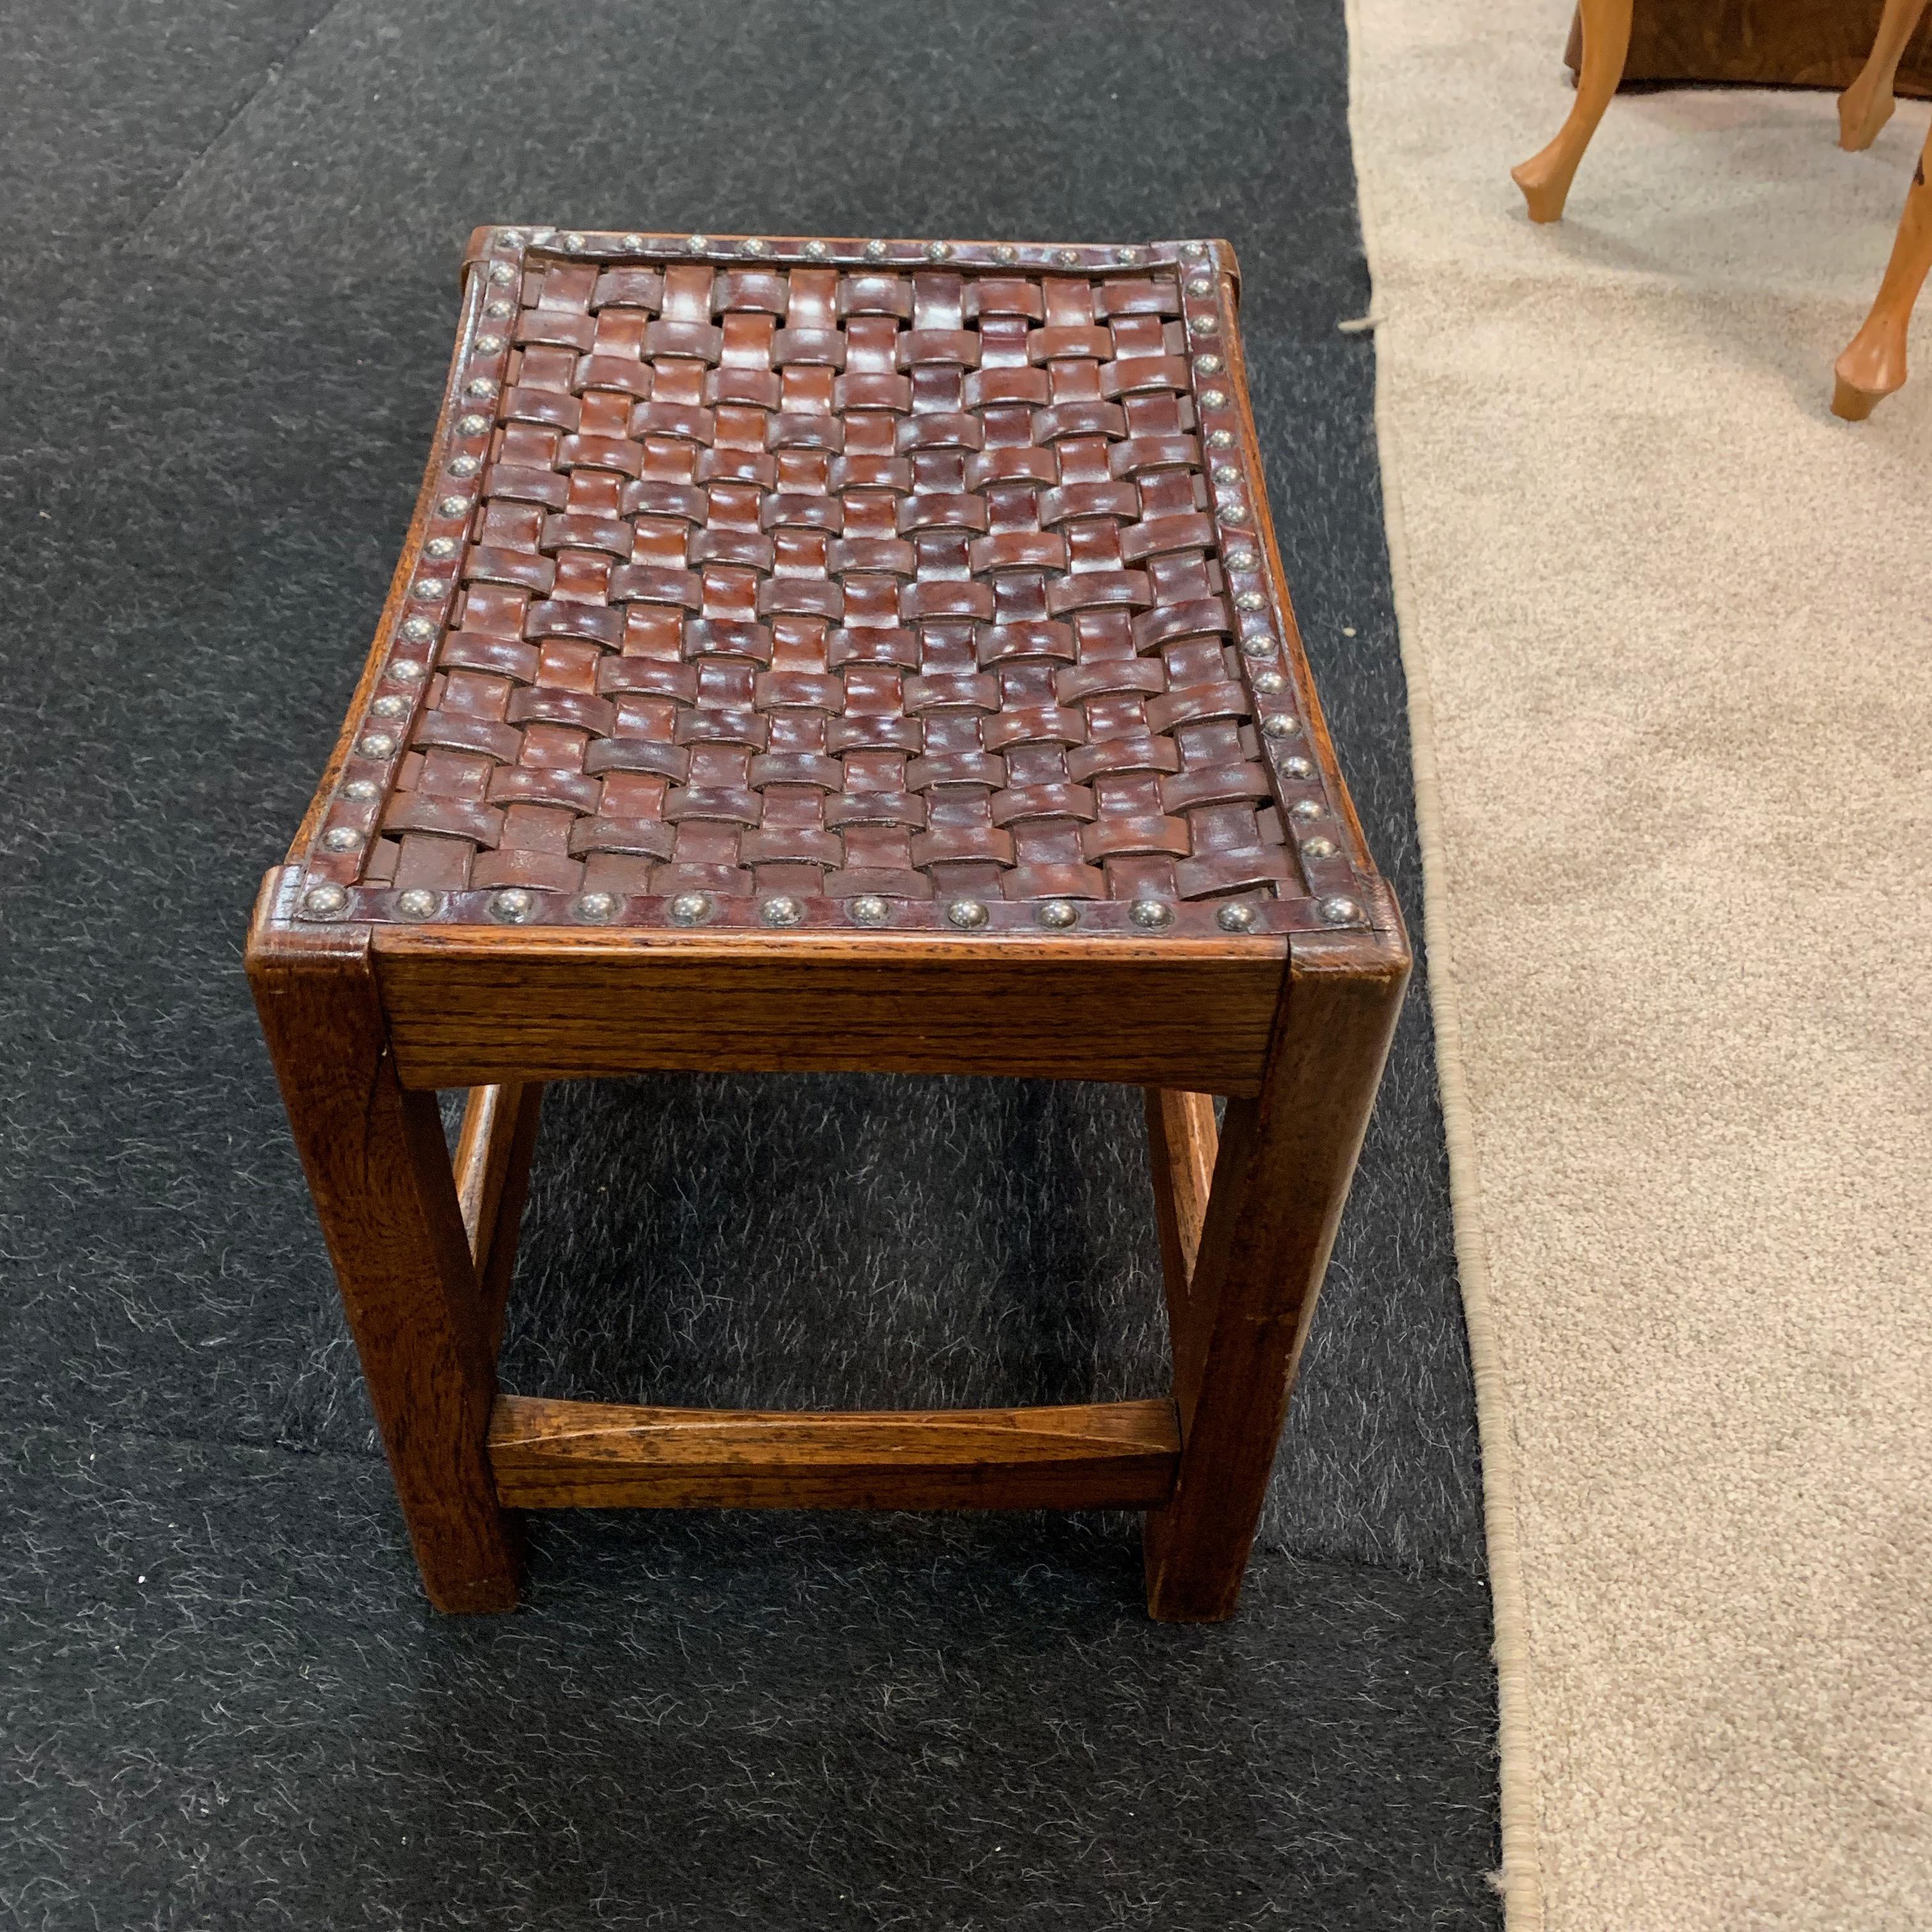 English Woven Leather Footstool, England, 19th Century